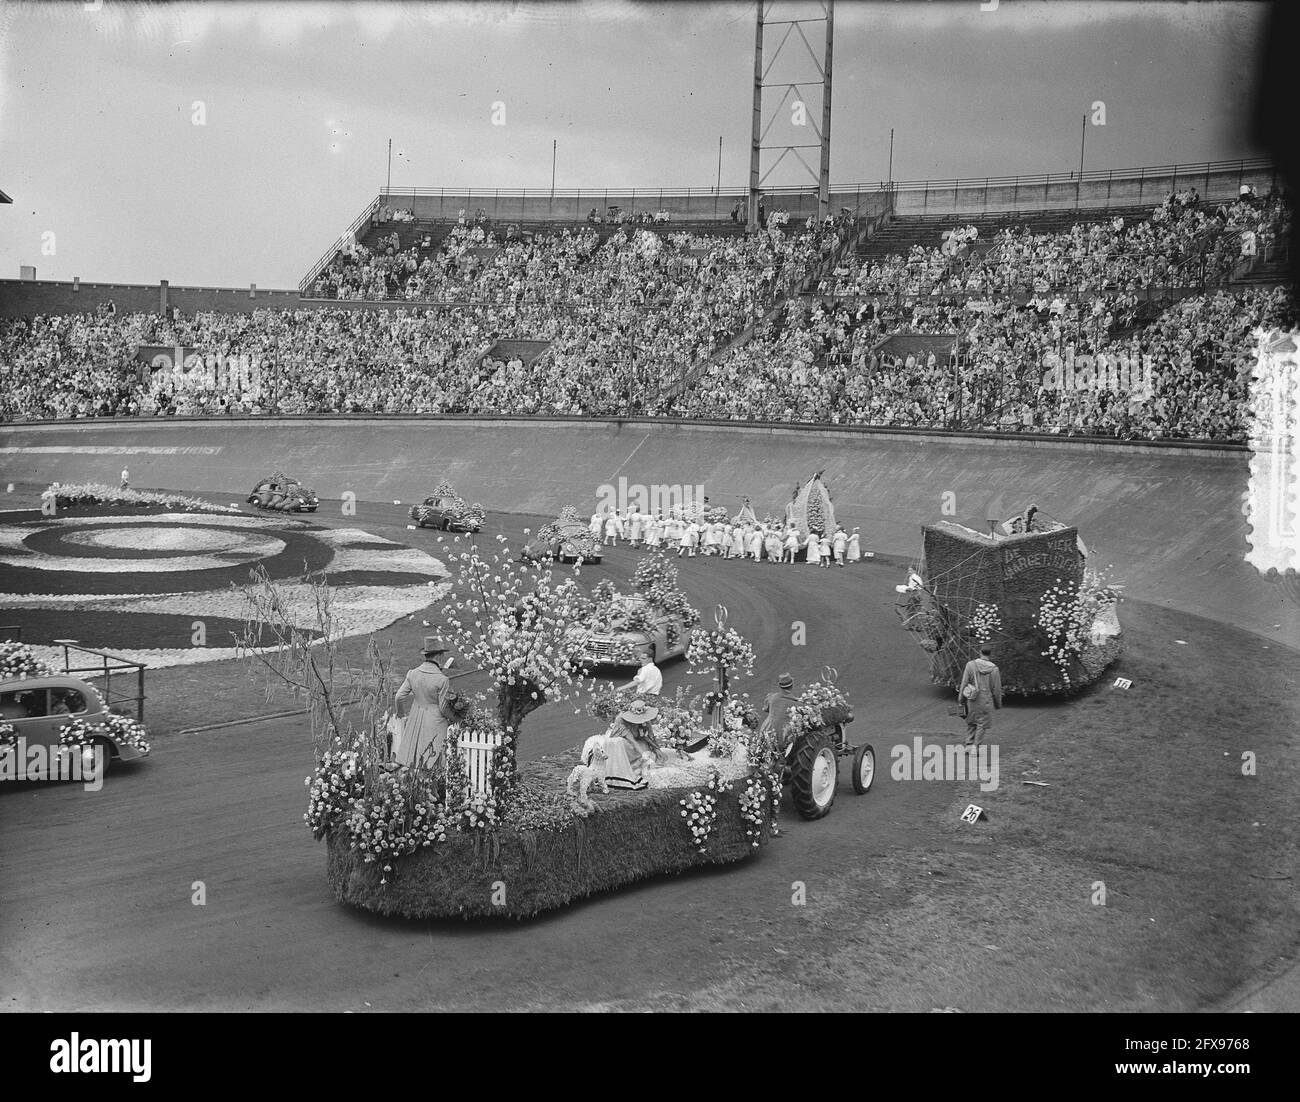 Bloemencorso Stadion Amsterdam, 6 September 1952, parades, stadiums, The Netherlands, 20th century press agency photo, news to remember, documentary, historic photography 1945-1990, visual stories, human history of the Twentieth Century, capturing moments in time Stock Photo